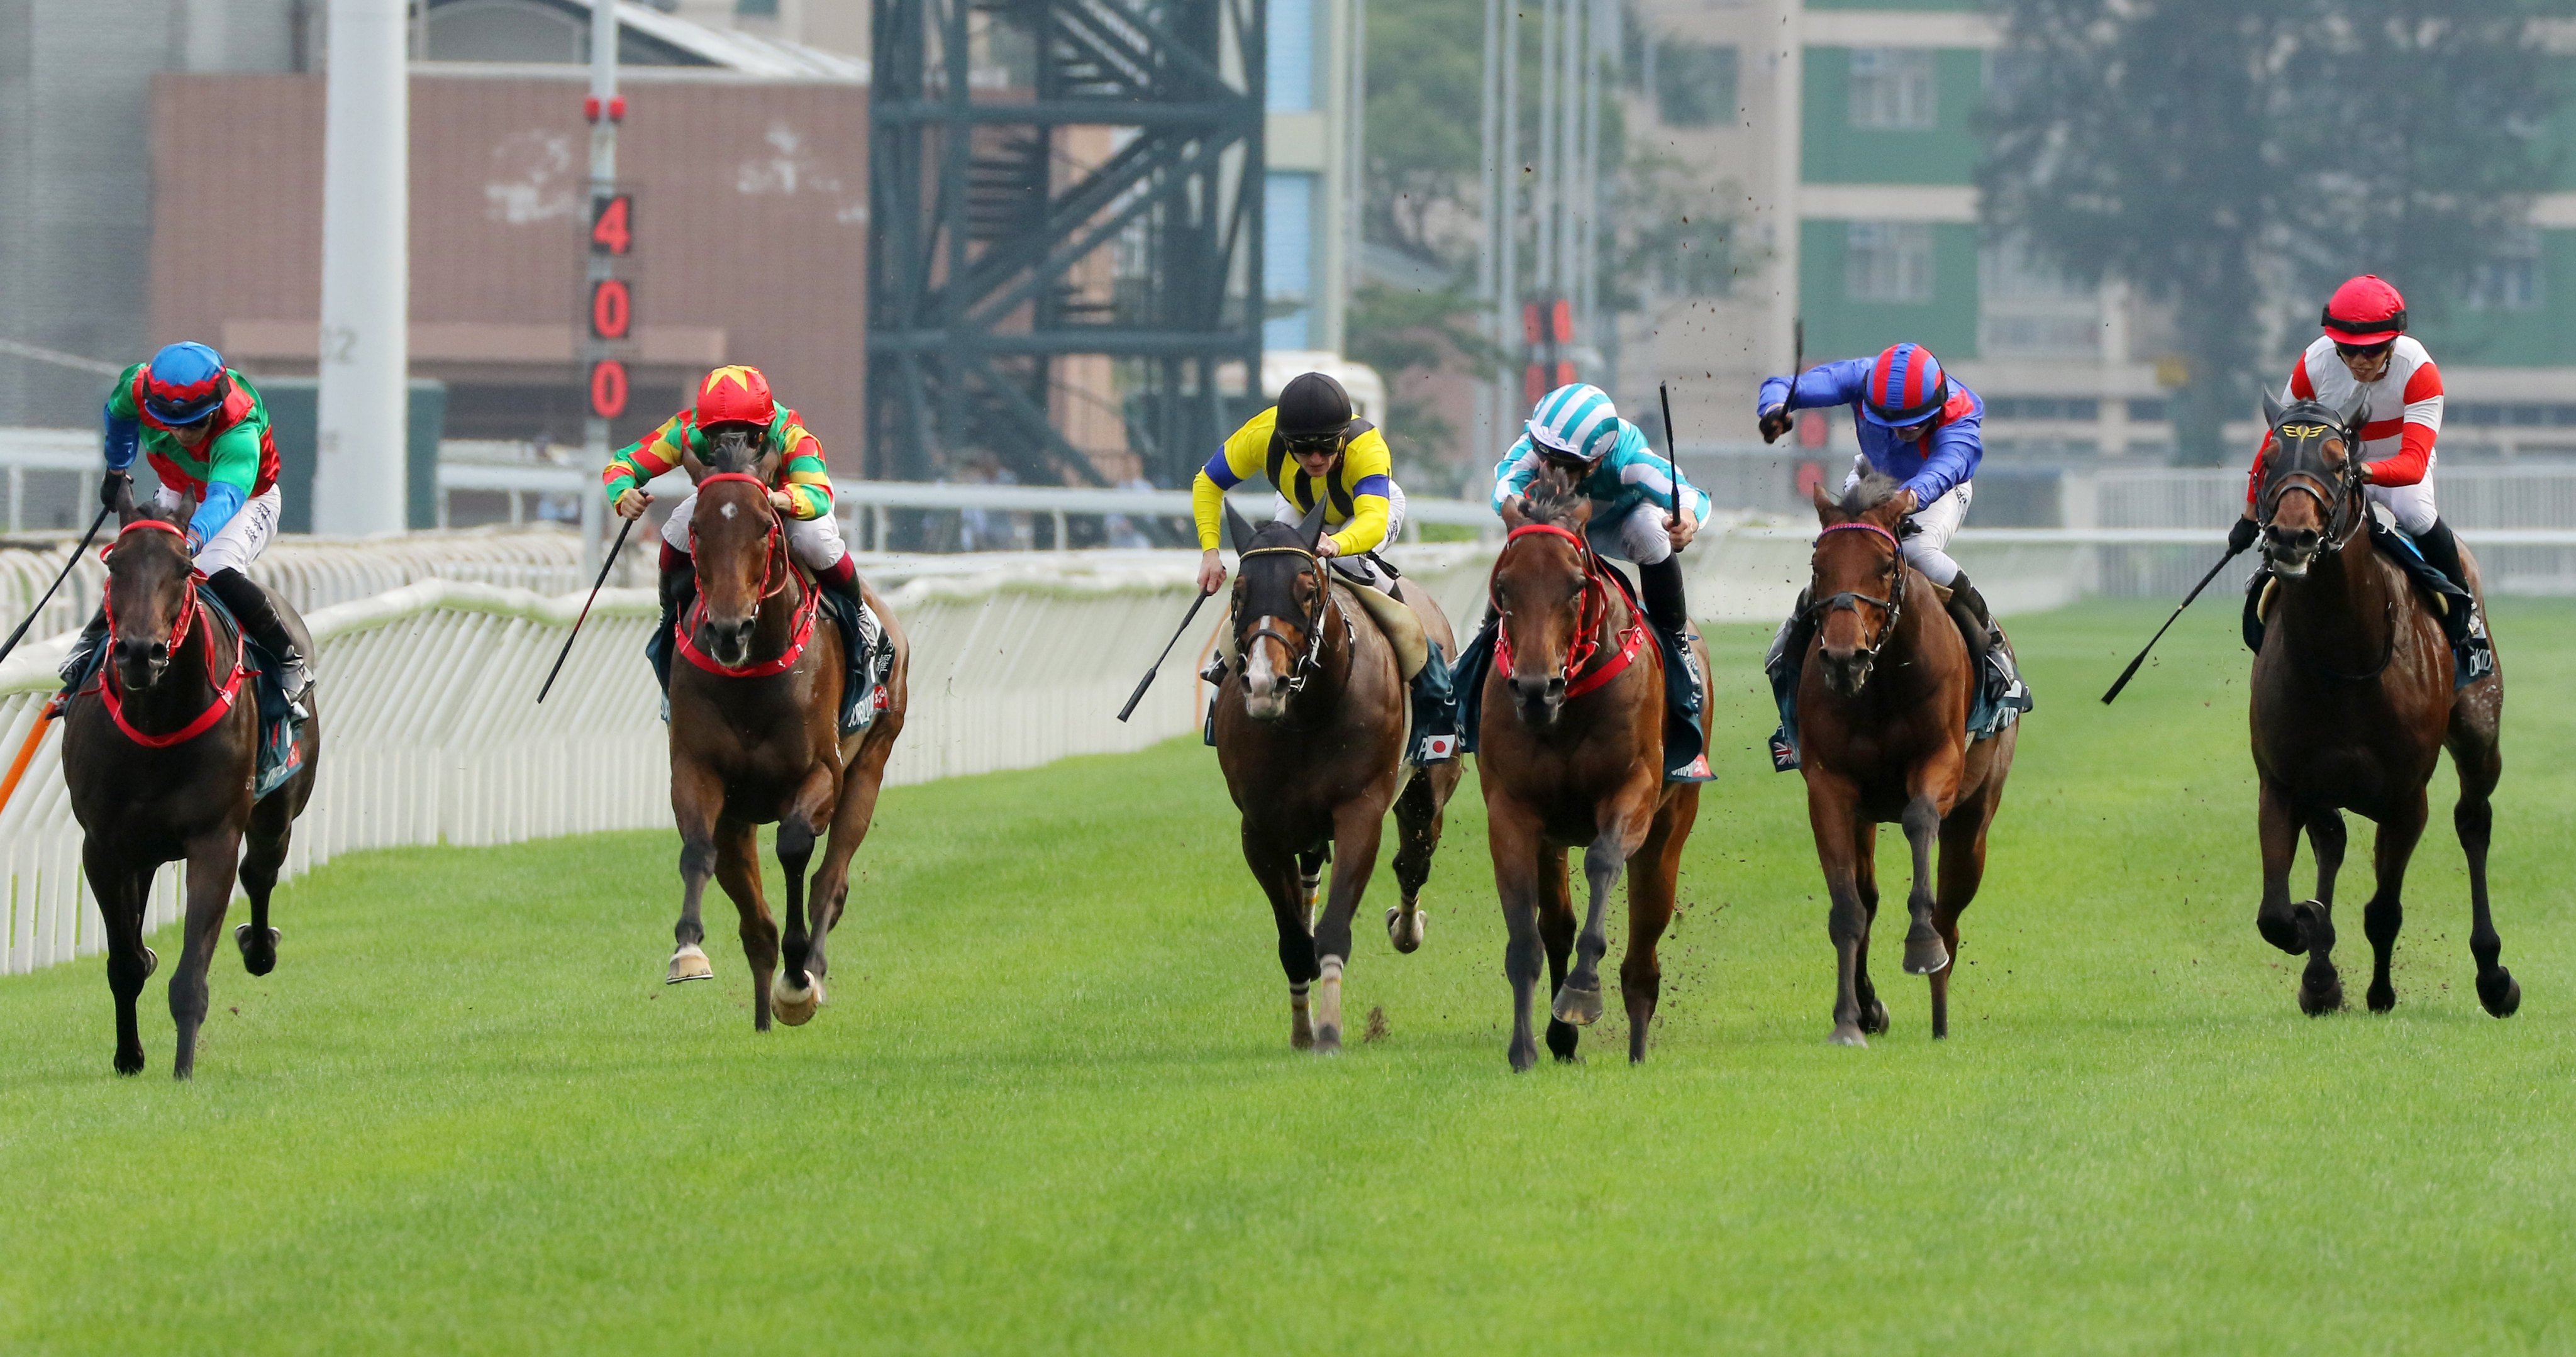 Romantic Warrior (middle) sees off Prognosis (left) and Dubai Honour (right) in last year’s Group One QE II Cup (2,000m). Photo: Kenneth Chan